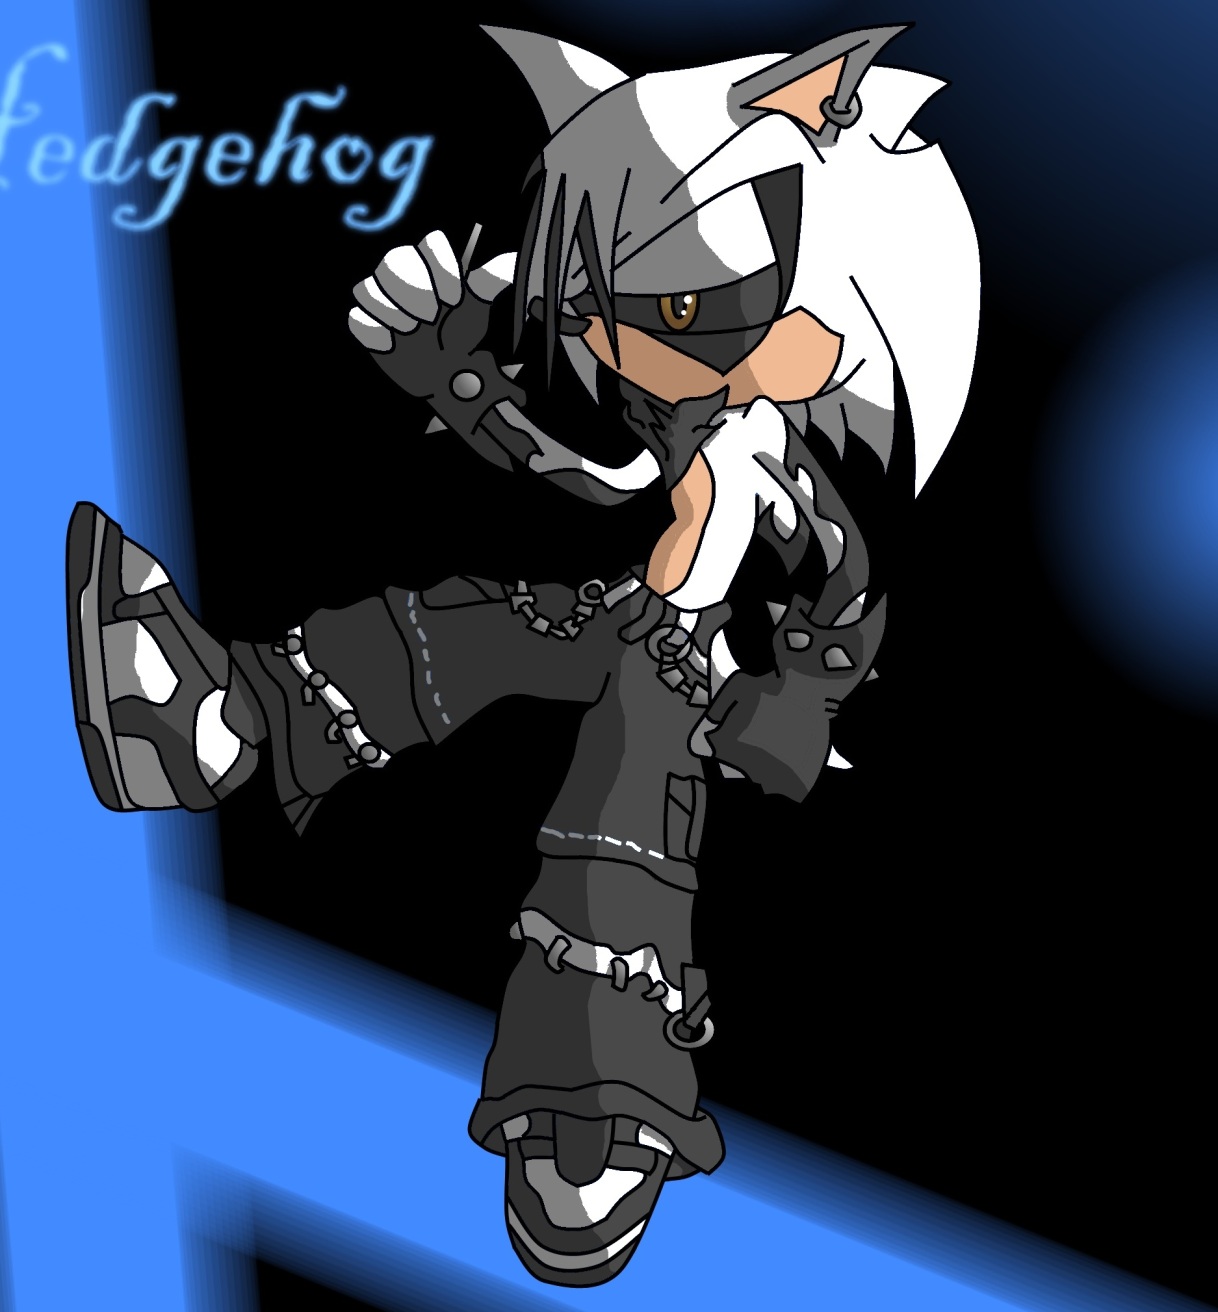 And a recolor by shadic_the_hedgehog